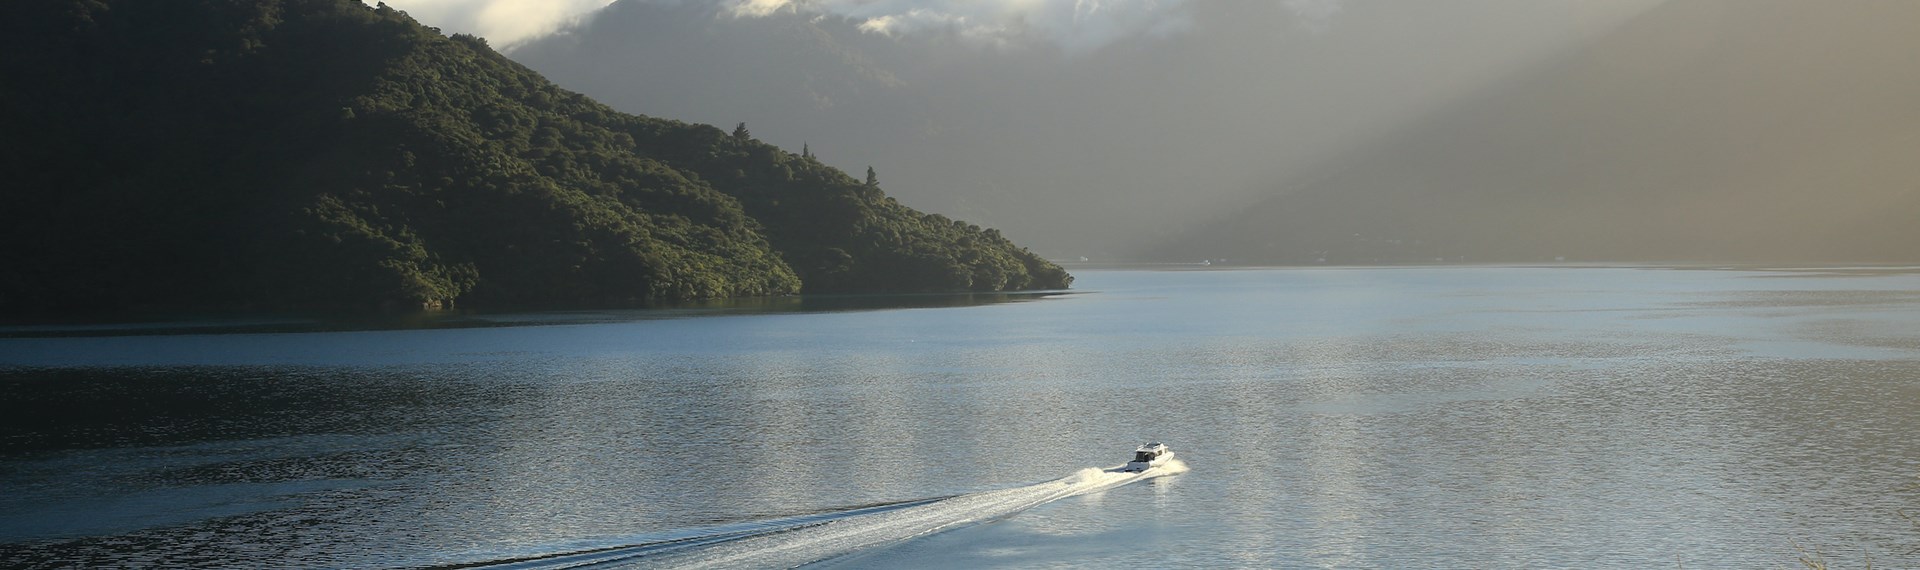 A Cougar Line boat leaves a wake in the calm water as it cruises through the Marlborough Sounds, New Zealand.